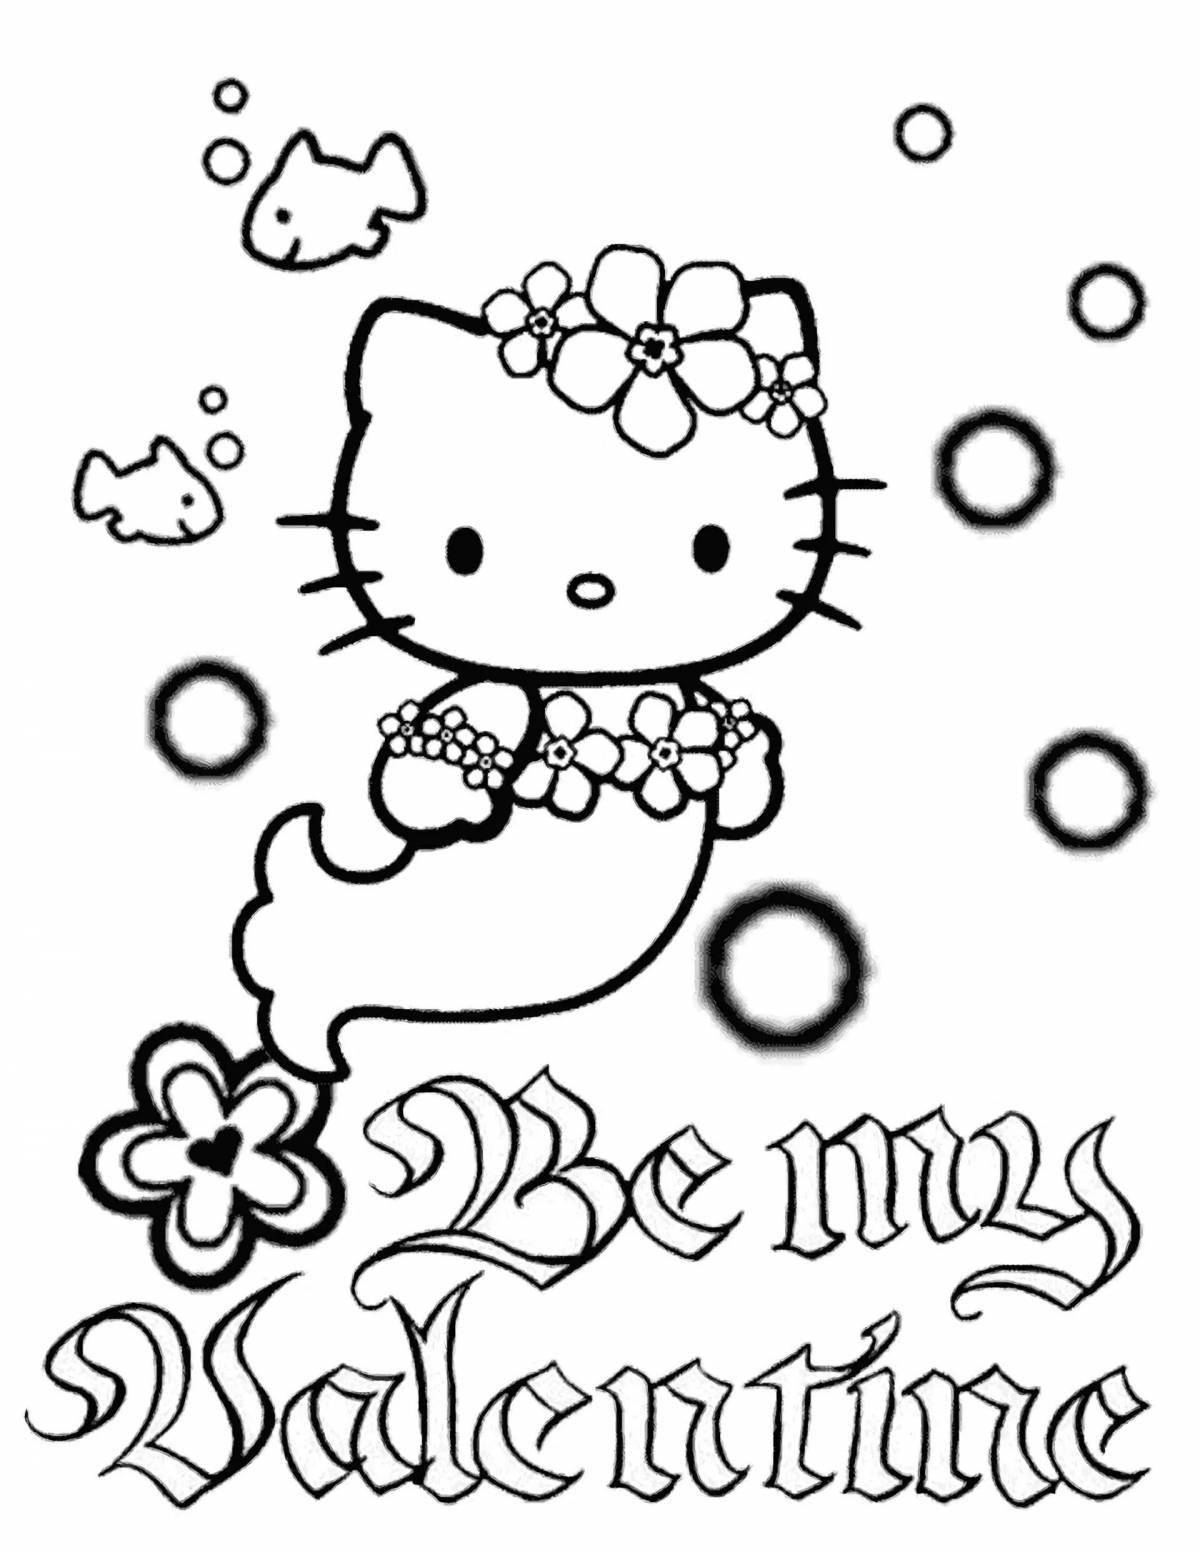 Colorful astro kitty coloring page